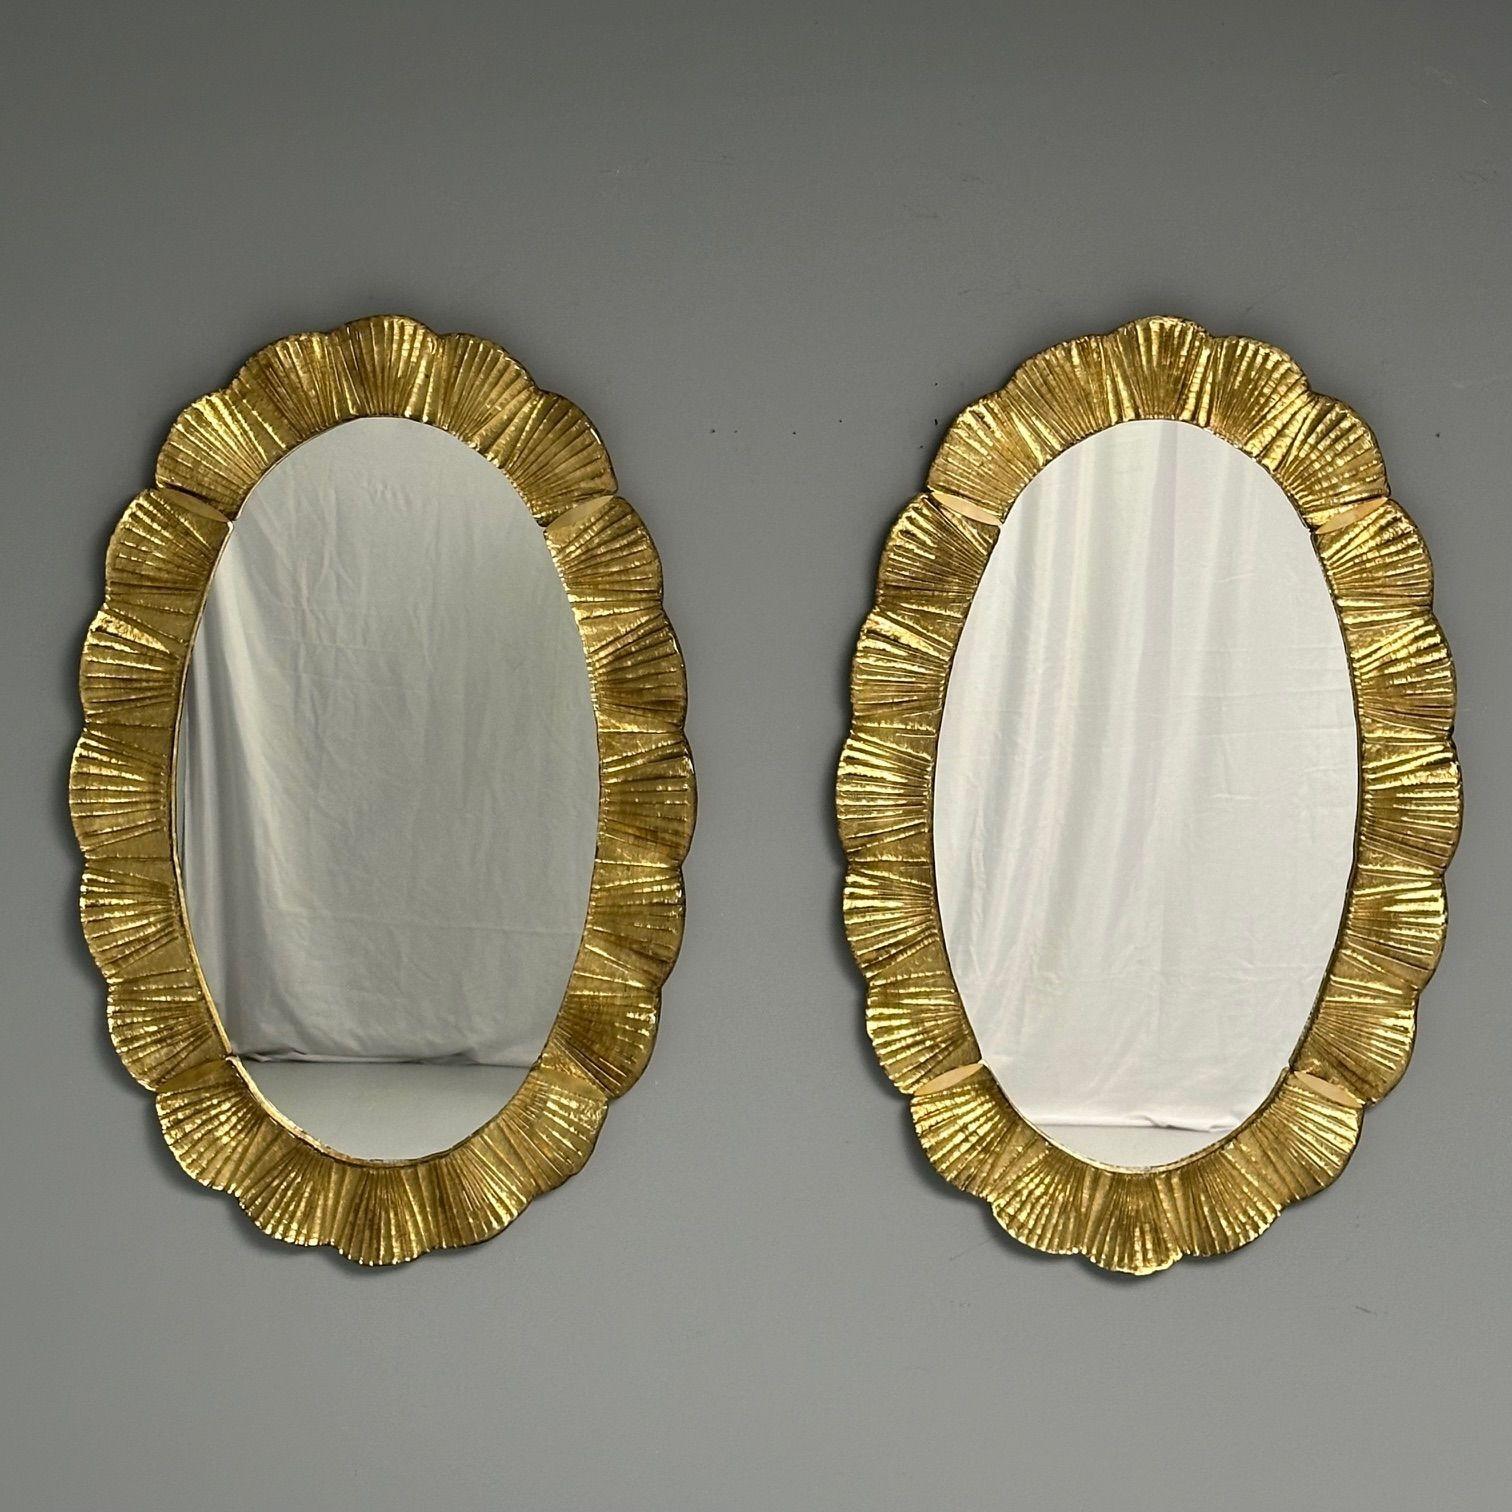 Italian Contemporary, Oval Wall Mirrors, Scallop Motif, Murano Glass, Gilt Gold, Italy For Sale